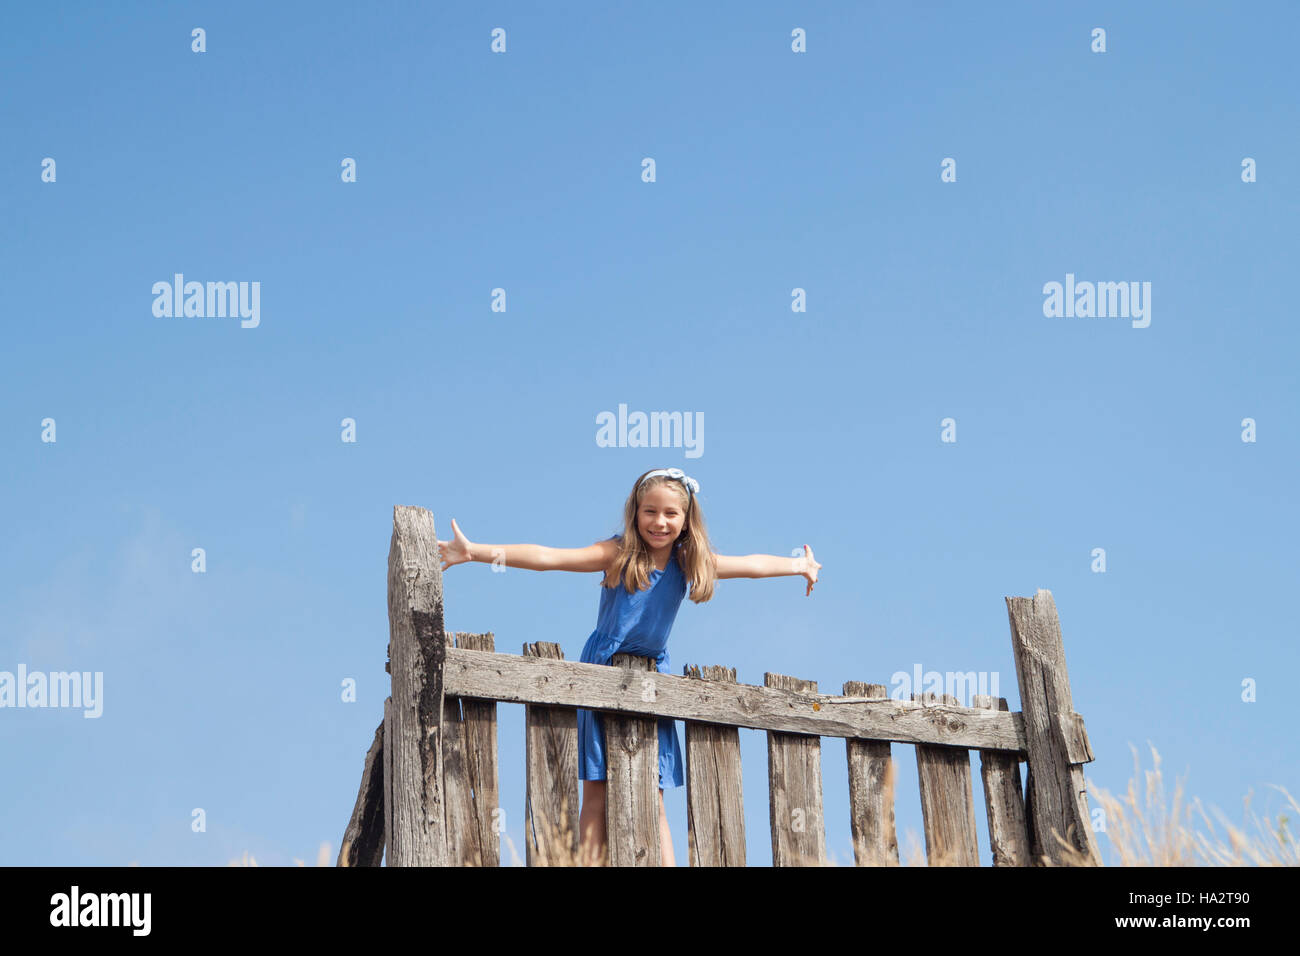 Girl standing on a fence Stock Photo